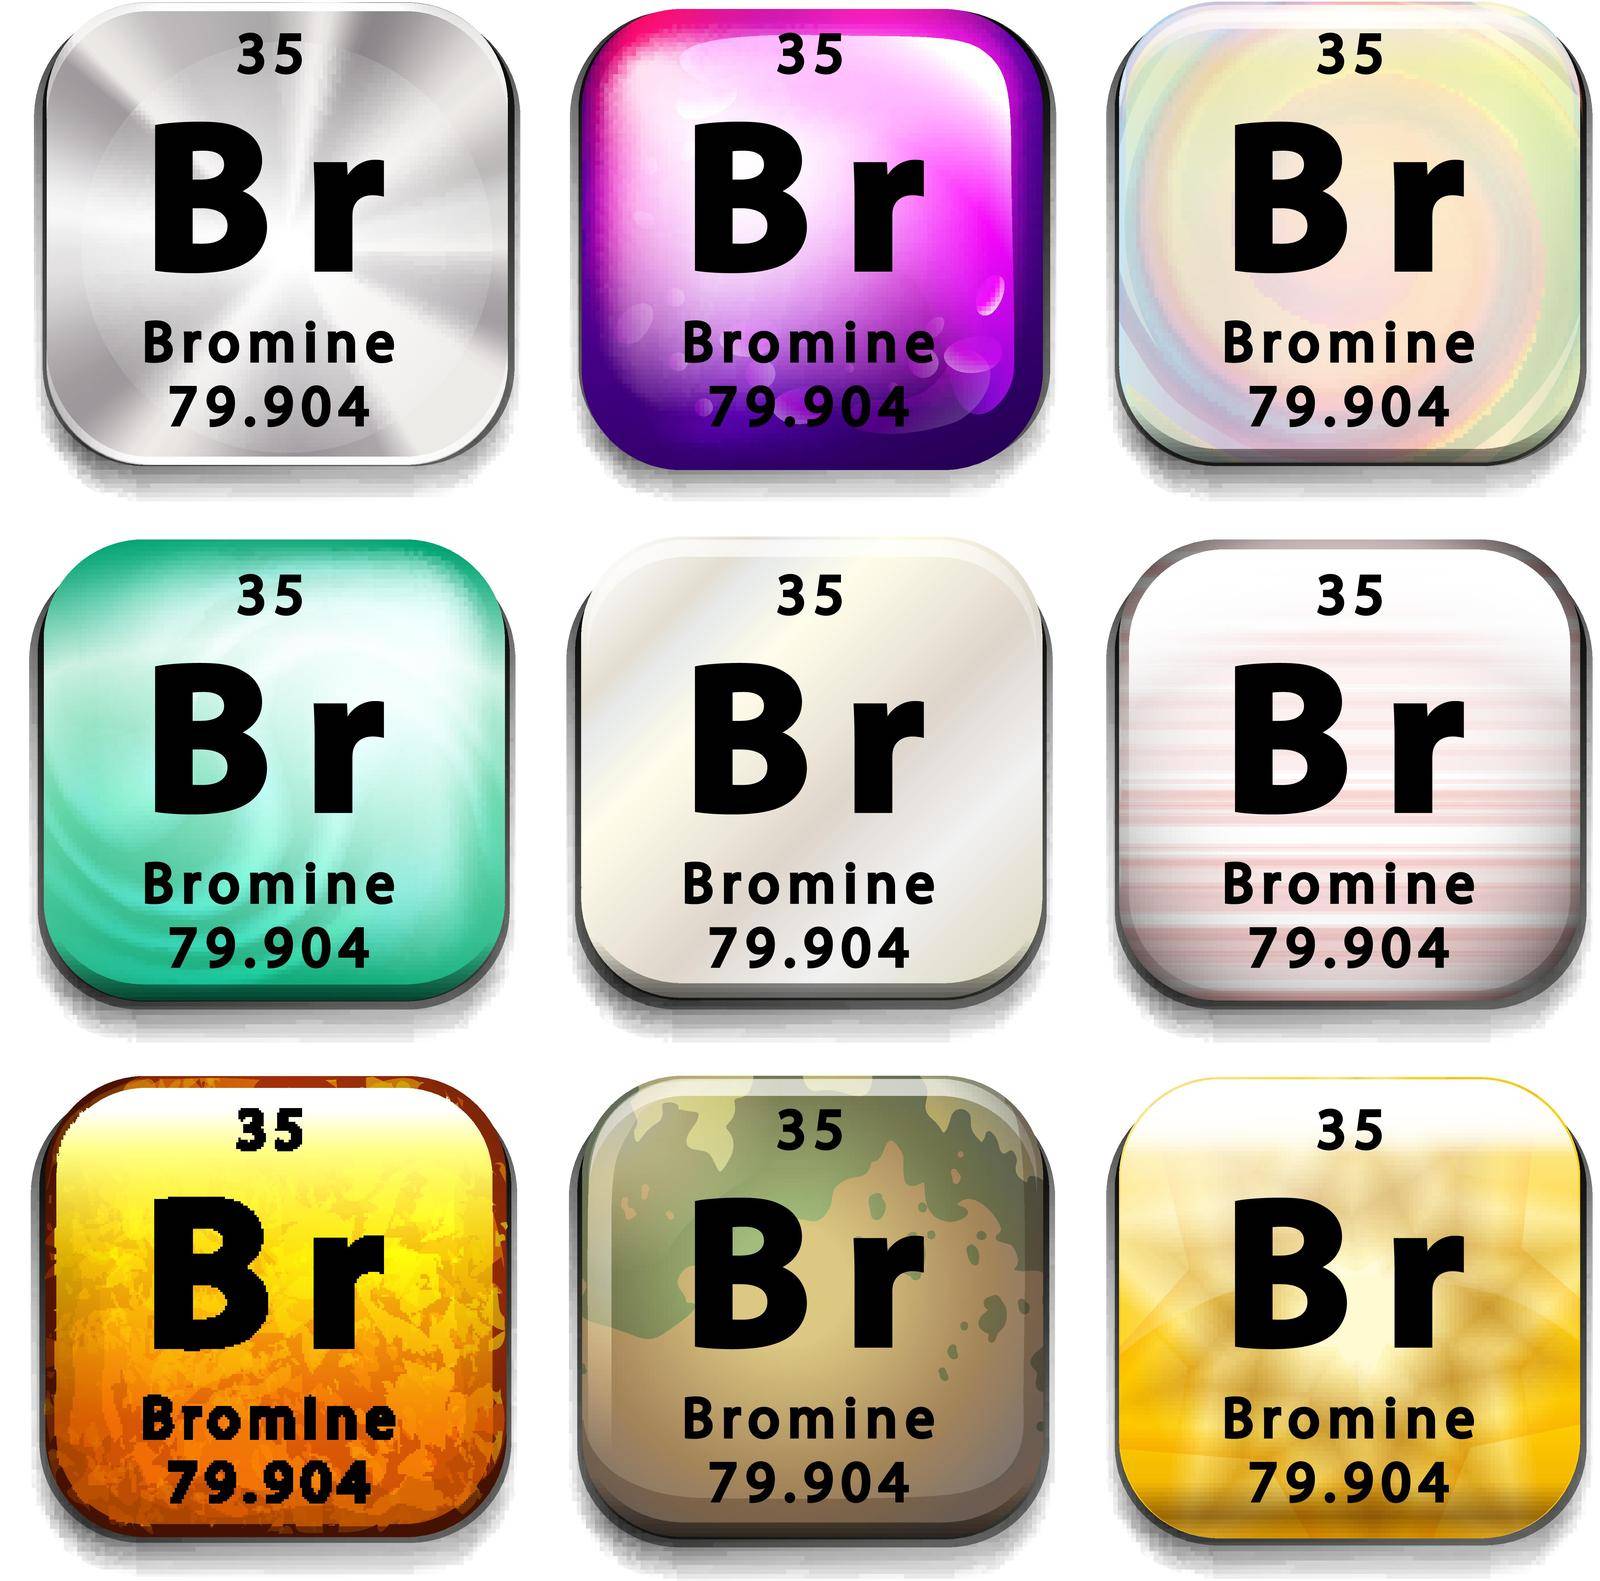 The Bromine element on a white background